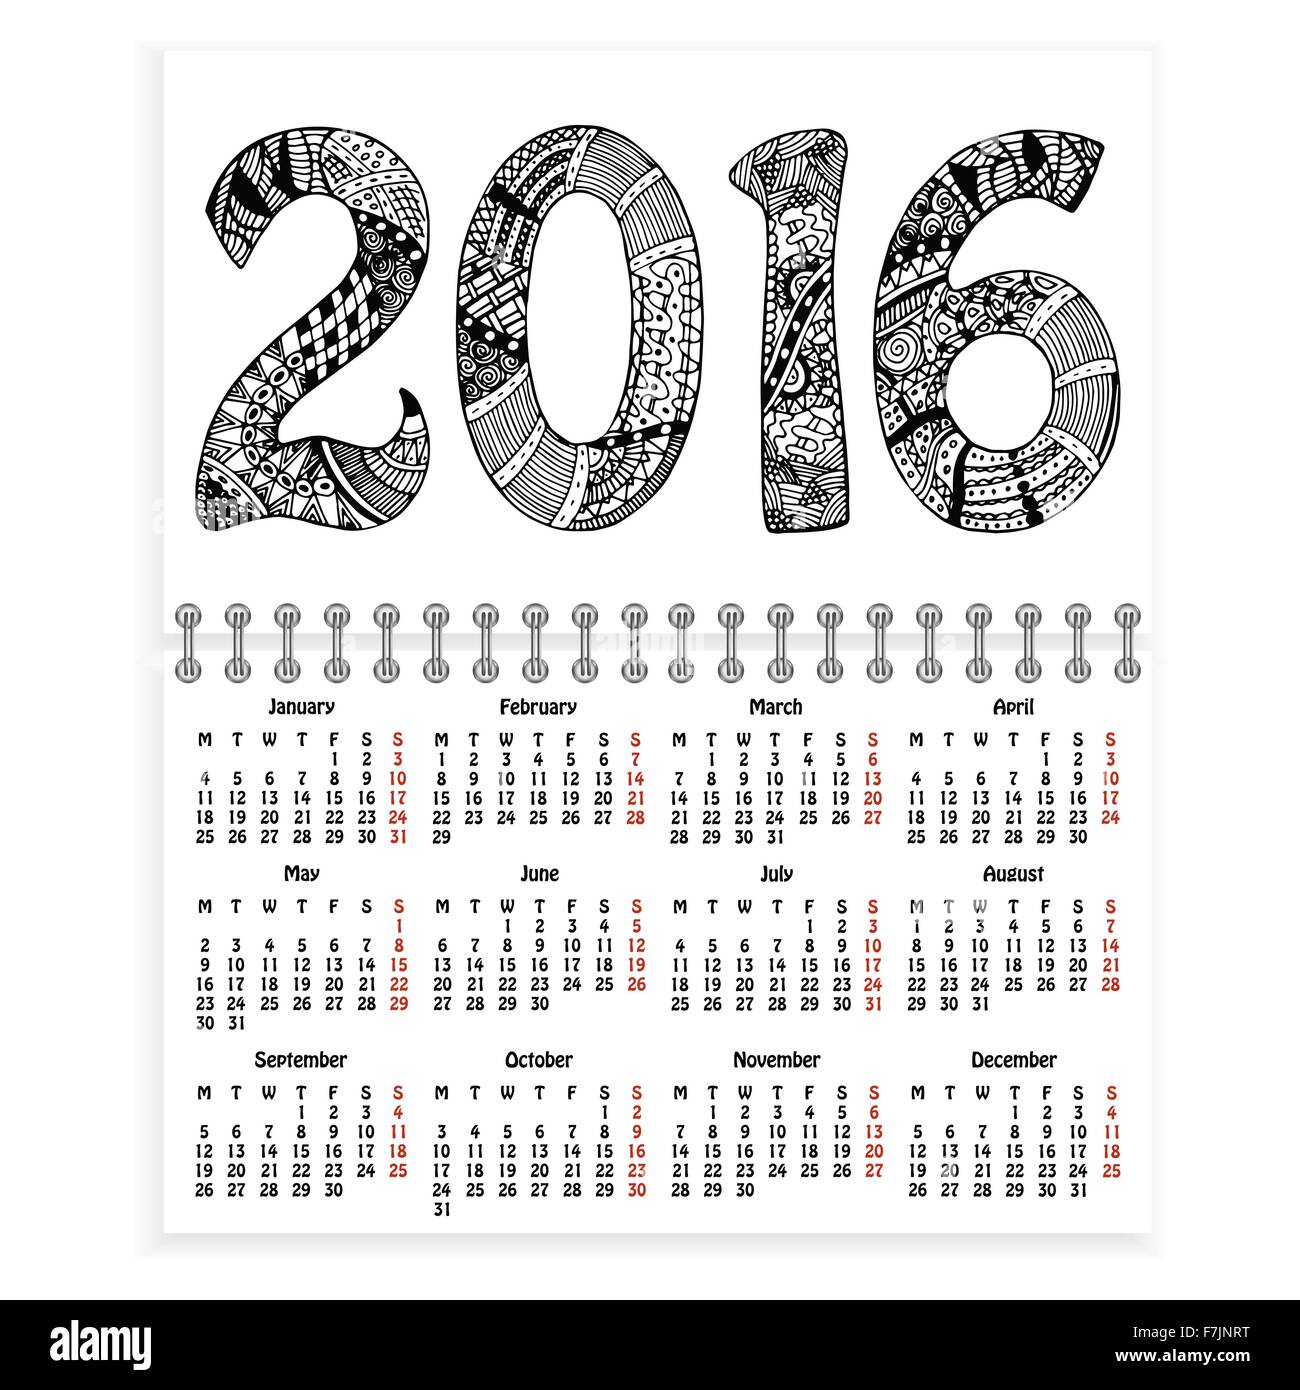 Spiral calendar with ornate 2016 as cover Stock Vector